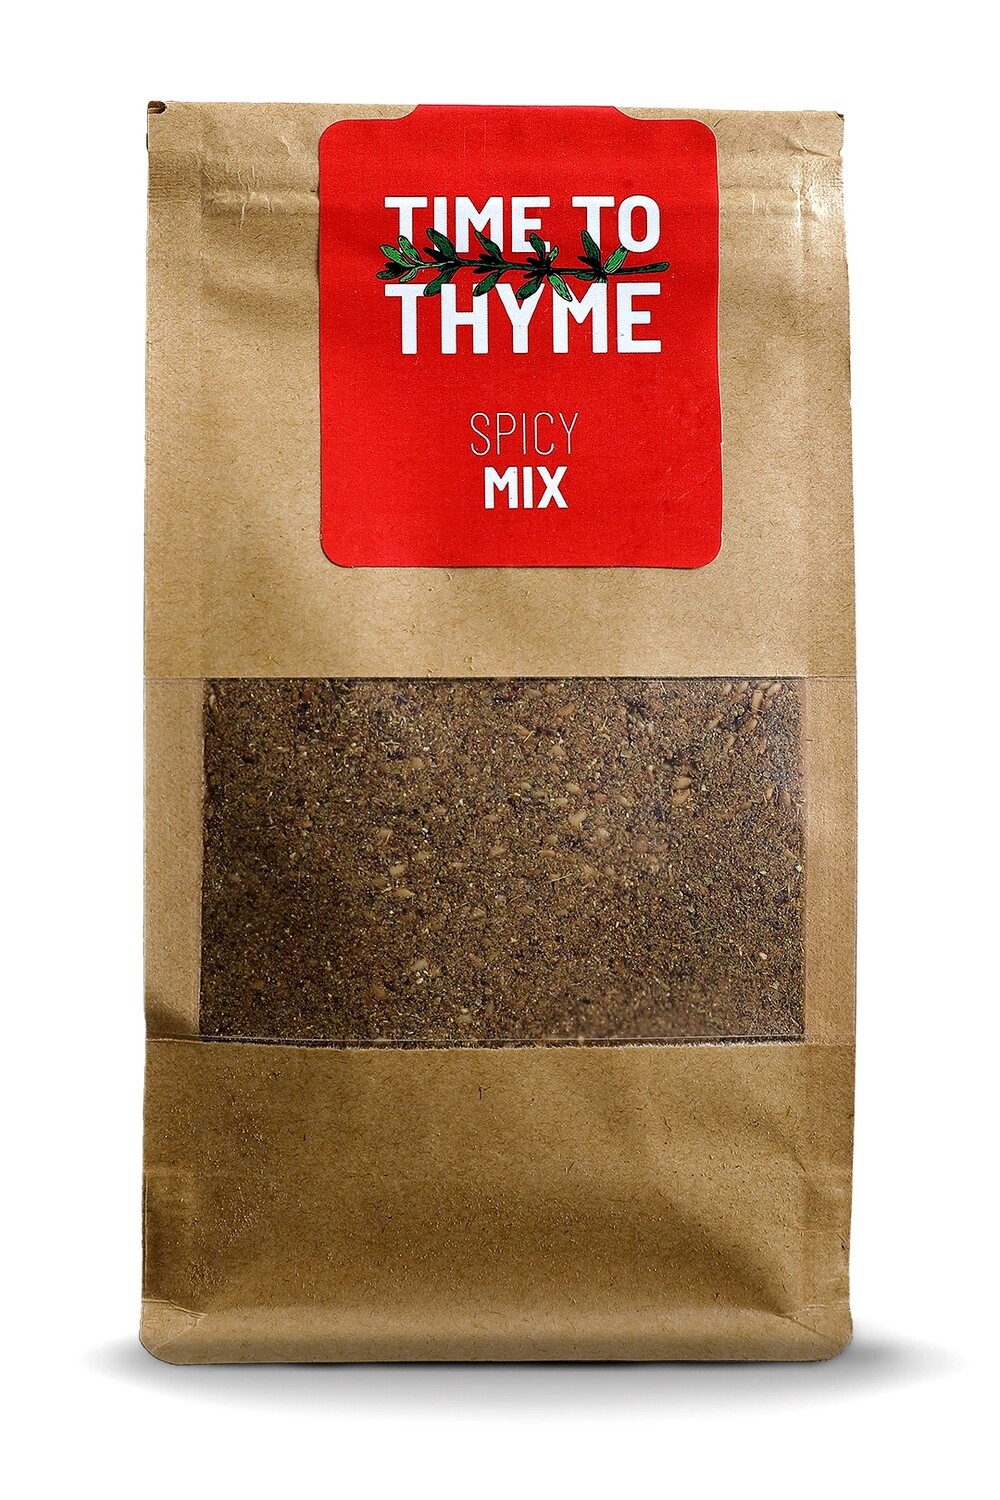 Thyme / Zaatar Spicy Mix (Bag) - Time to Thyme